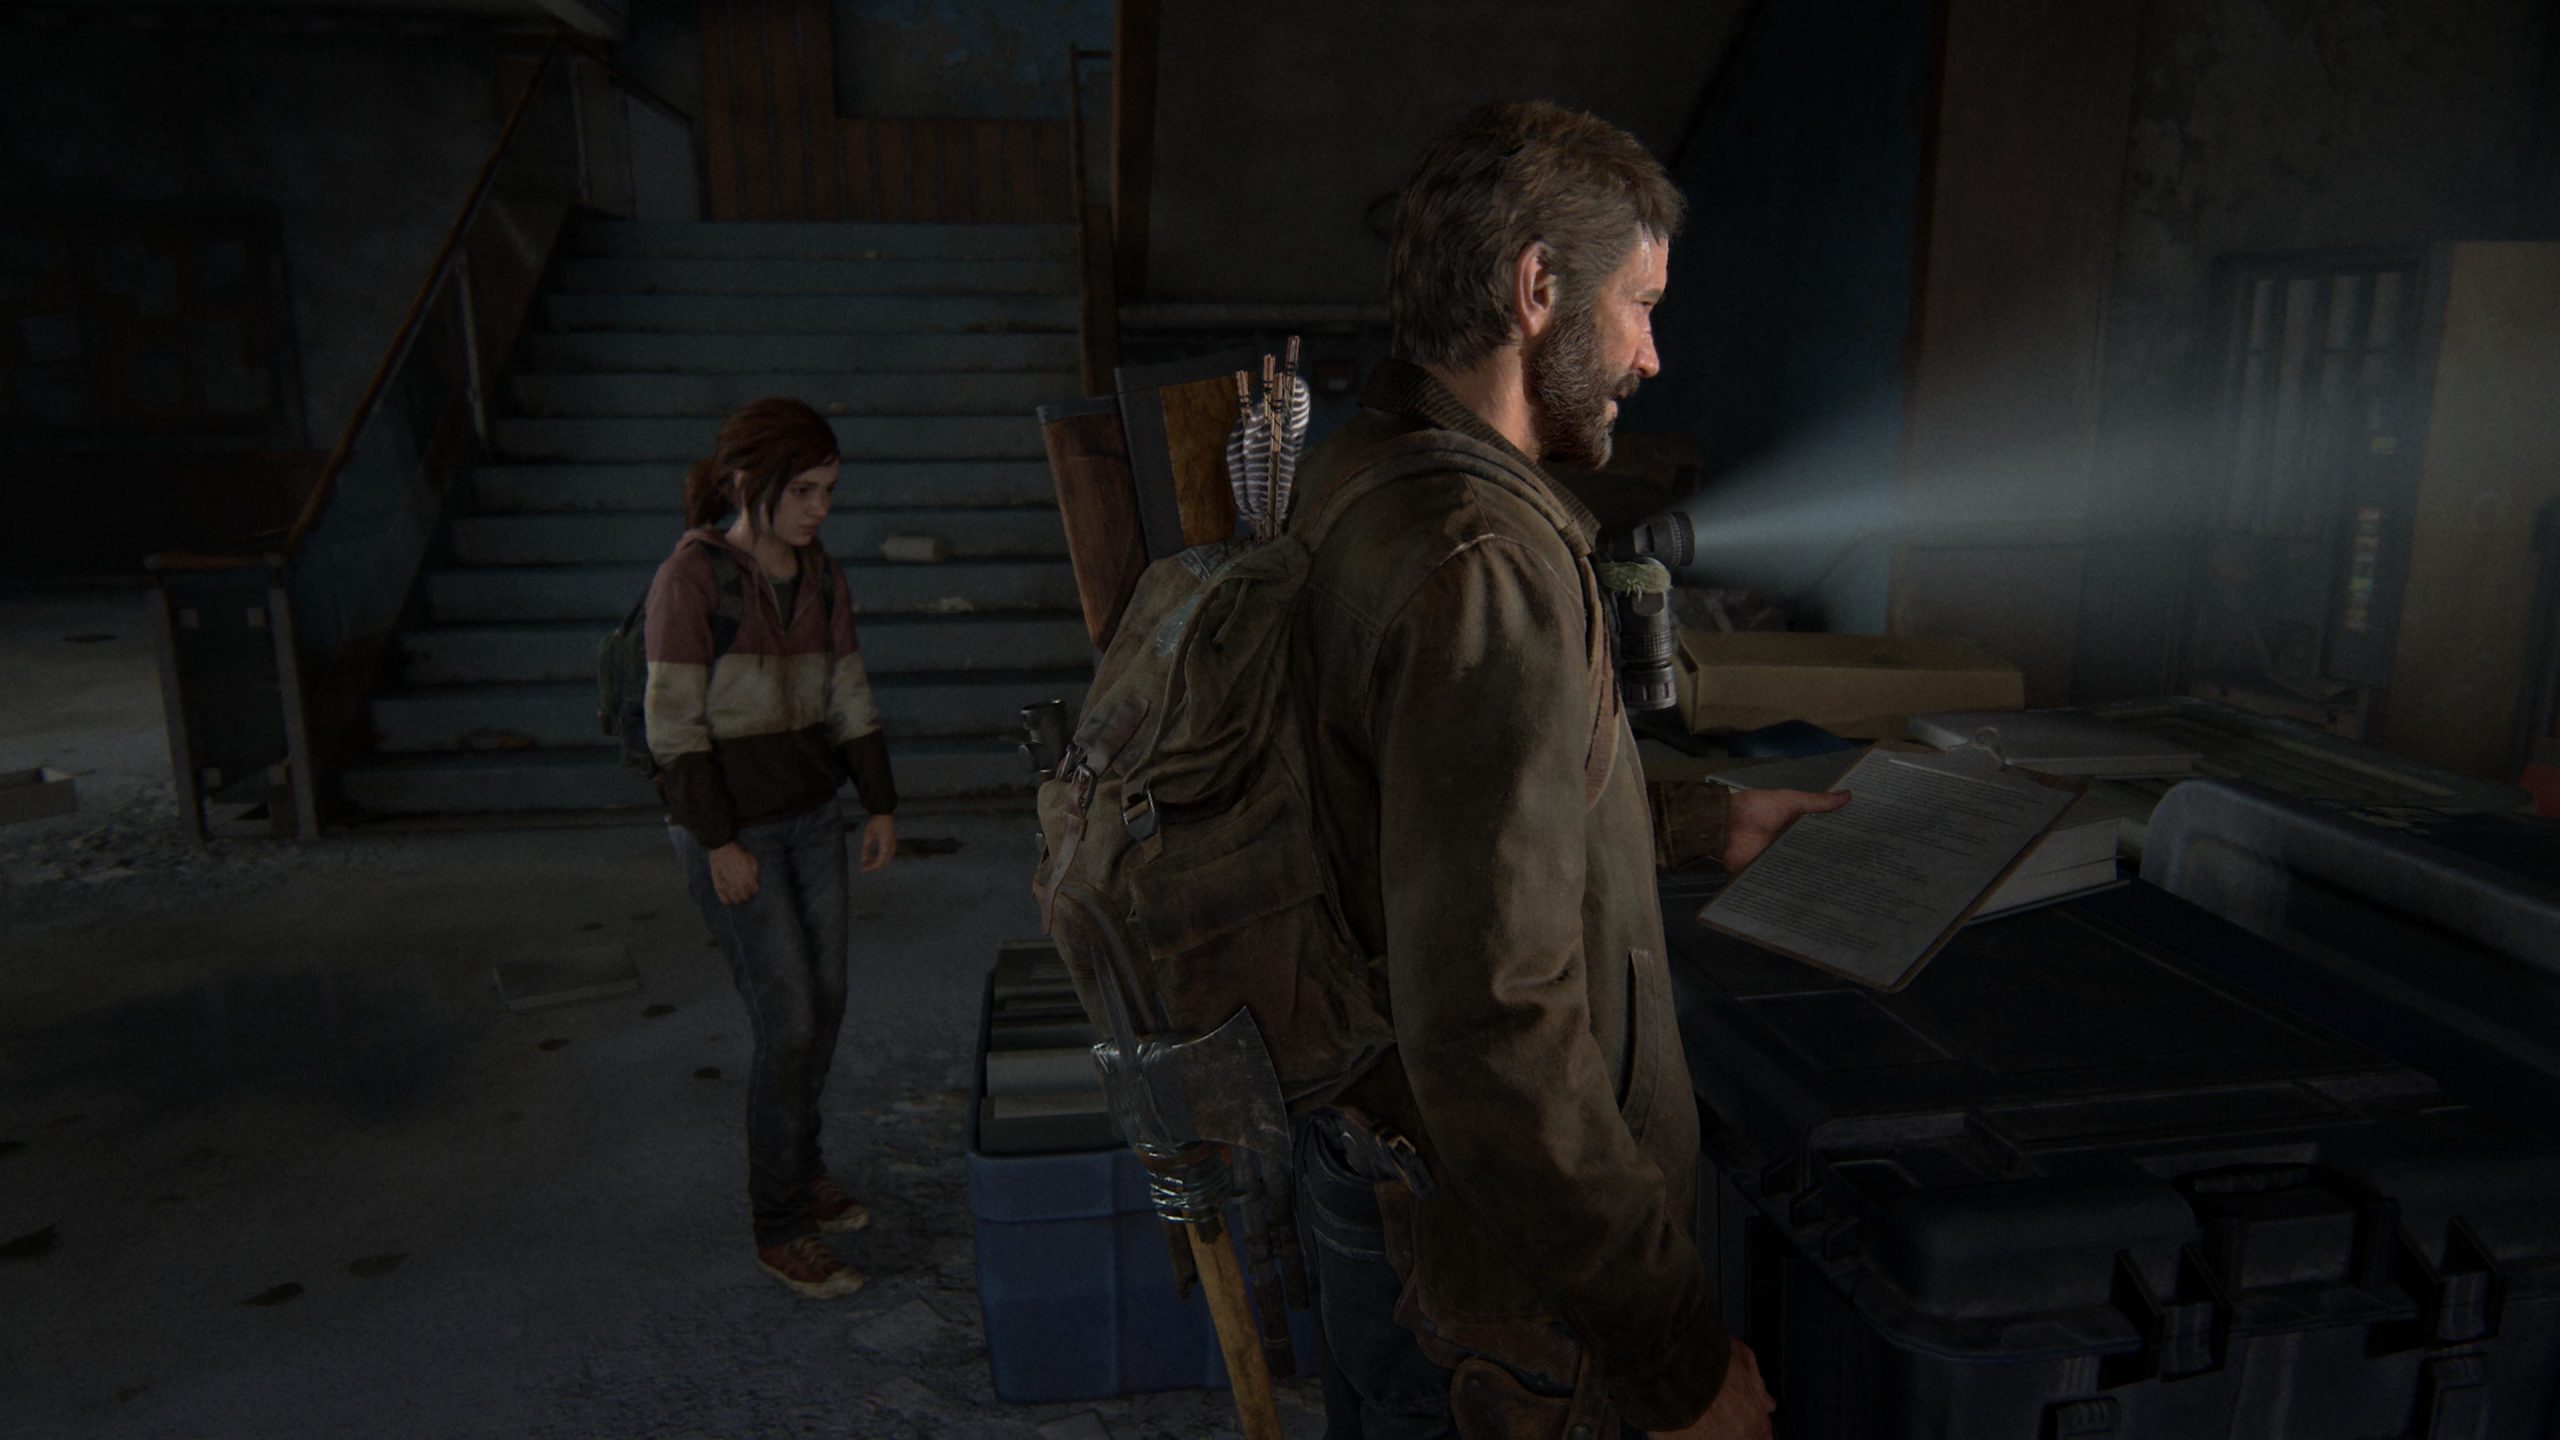 Why The Last of Us Multiplayer Is Awesome - IGN Conversation 